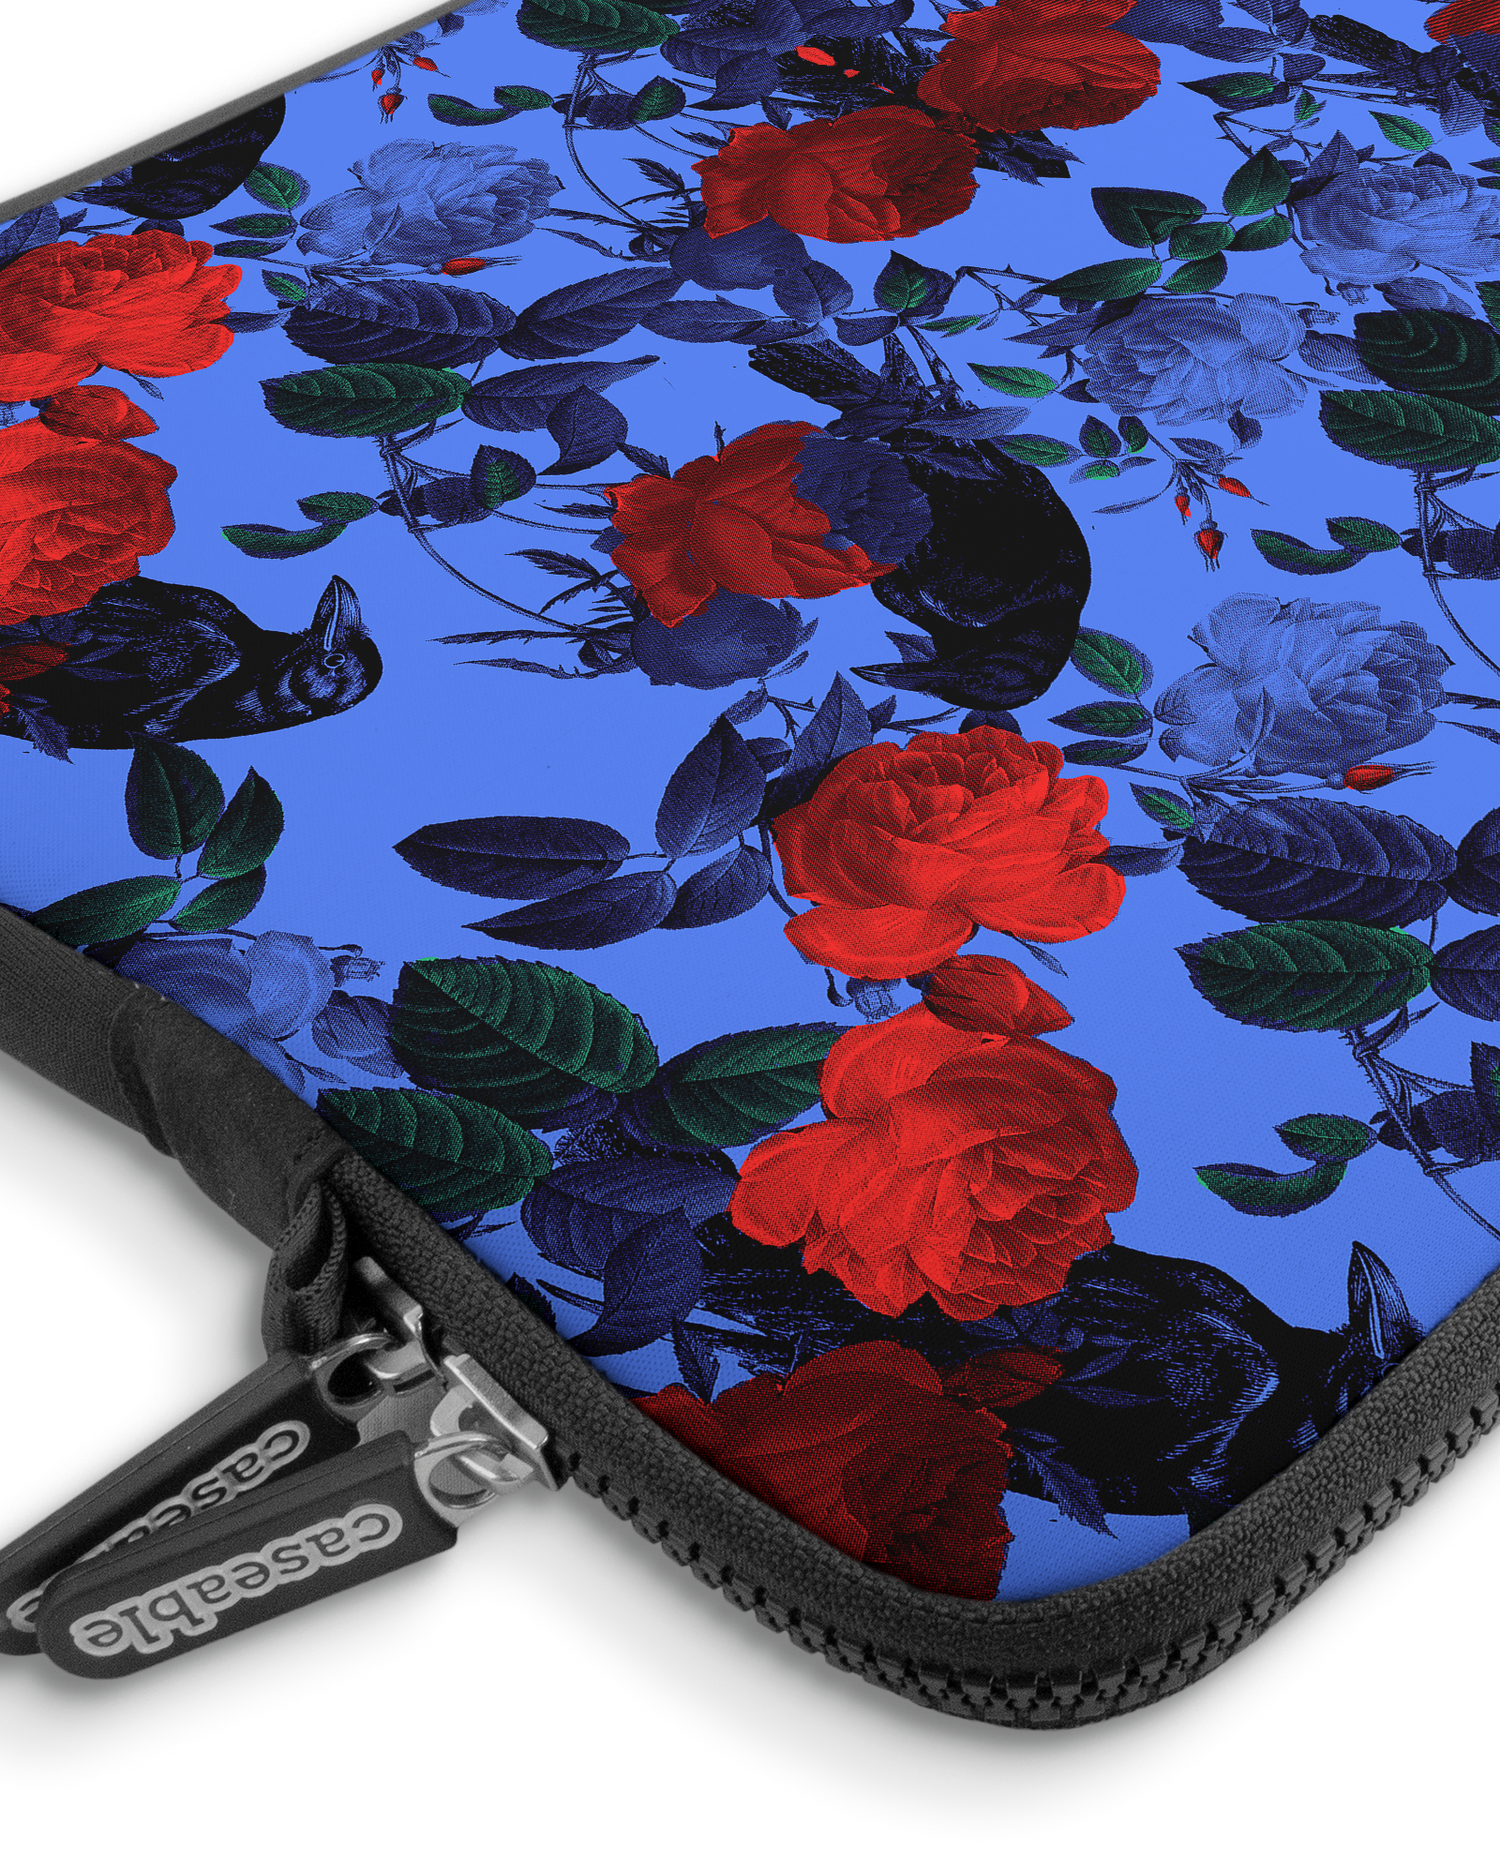 Roses And Ravens Premium Laptop Bag 13-14 inch with device inside